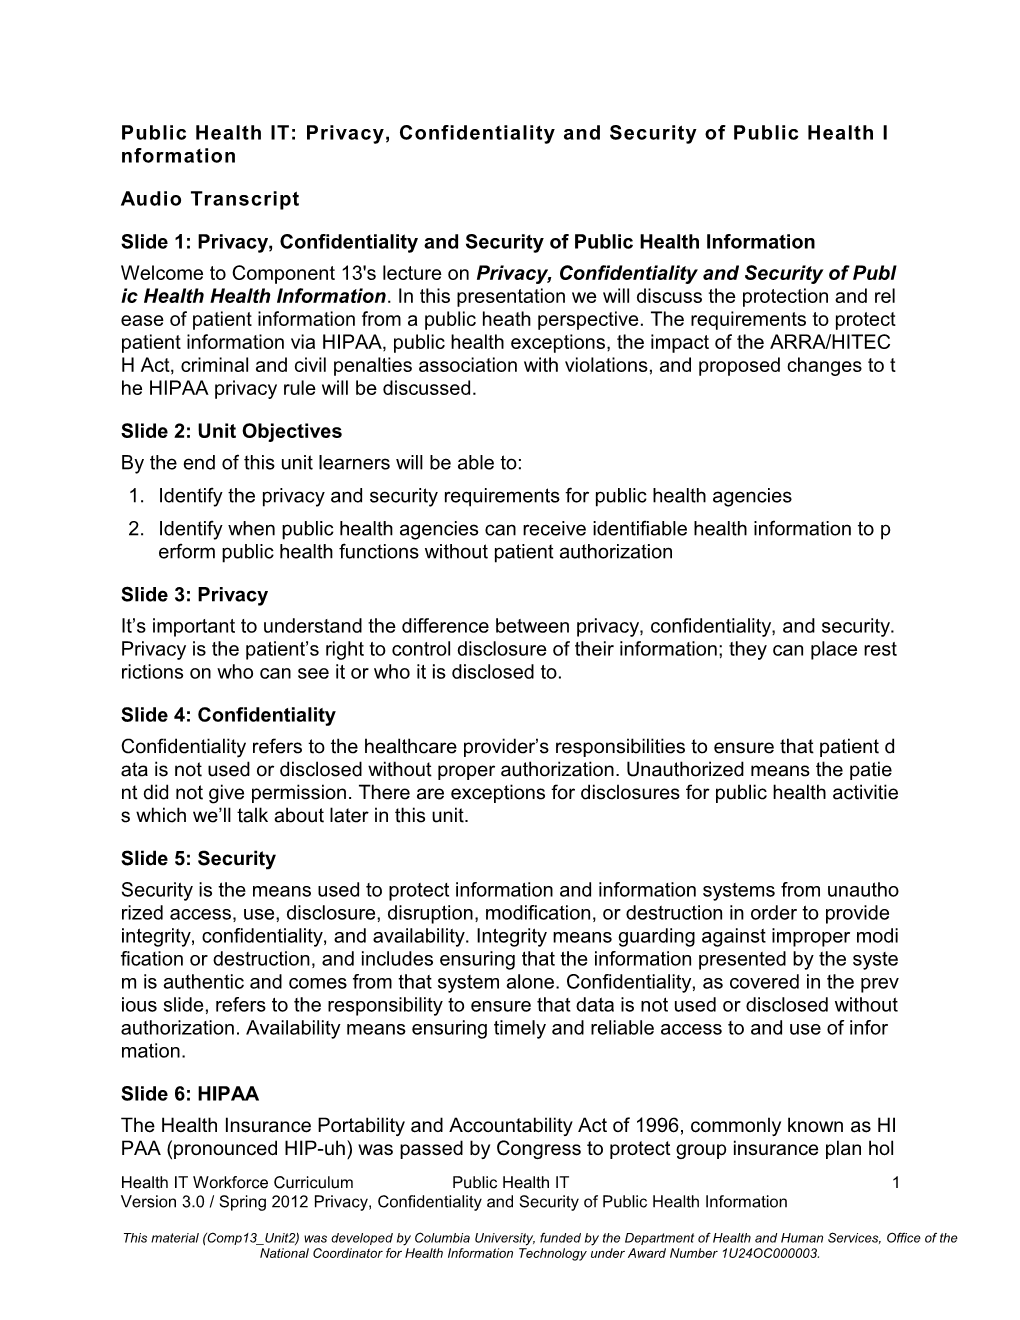 Public Health IT: Privacy, Confidentiality and Security of Public Health Information